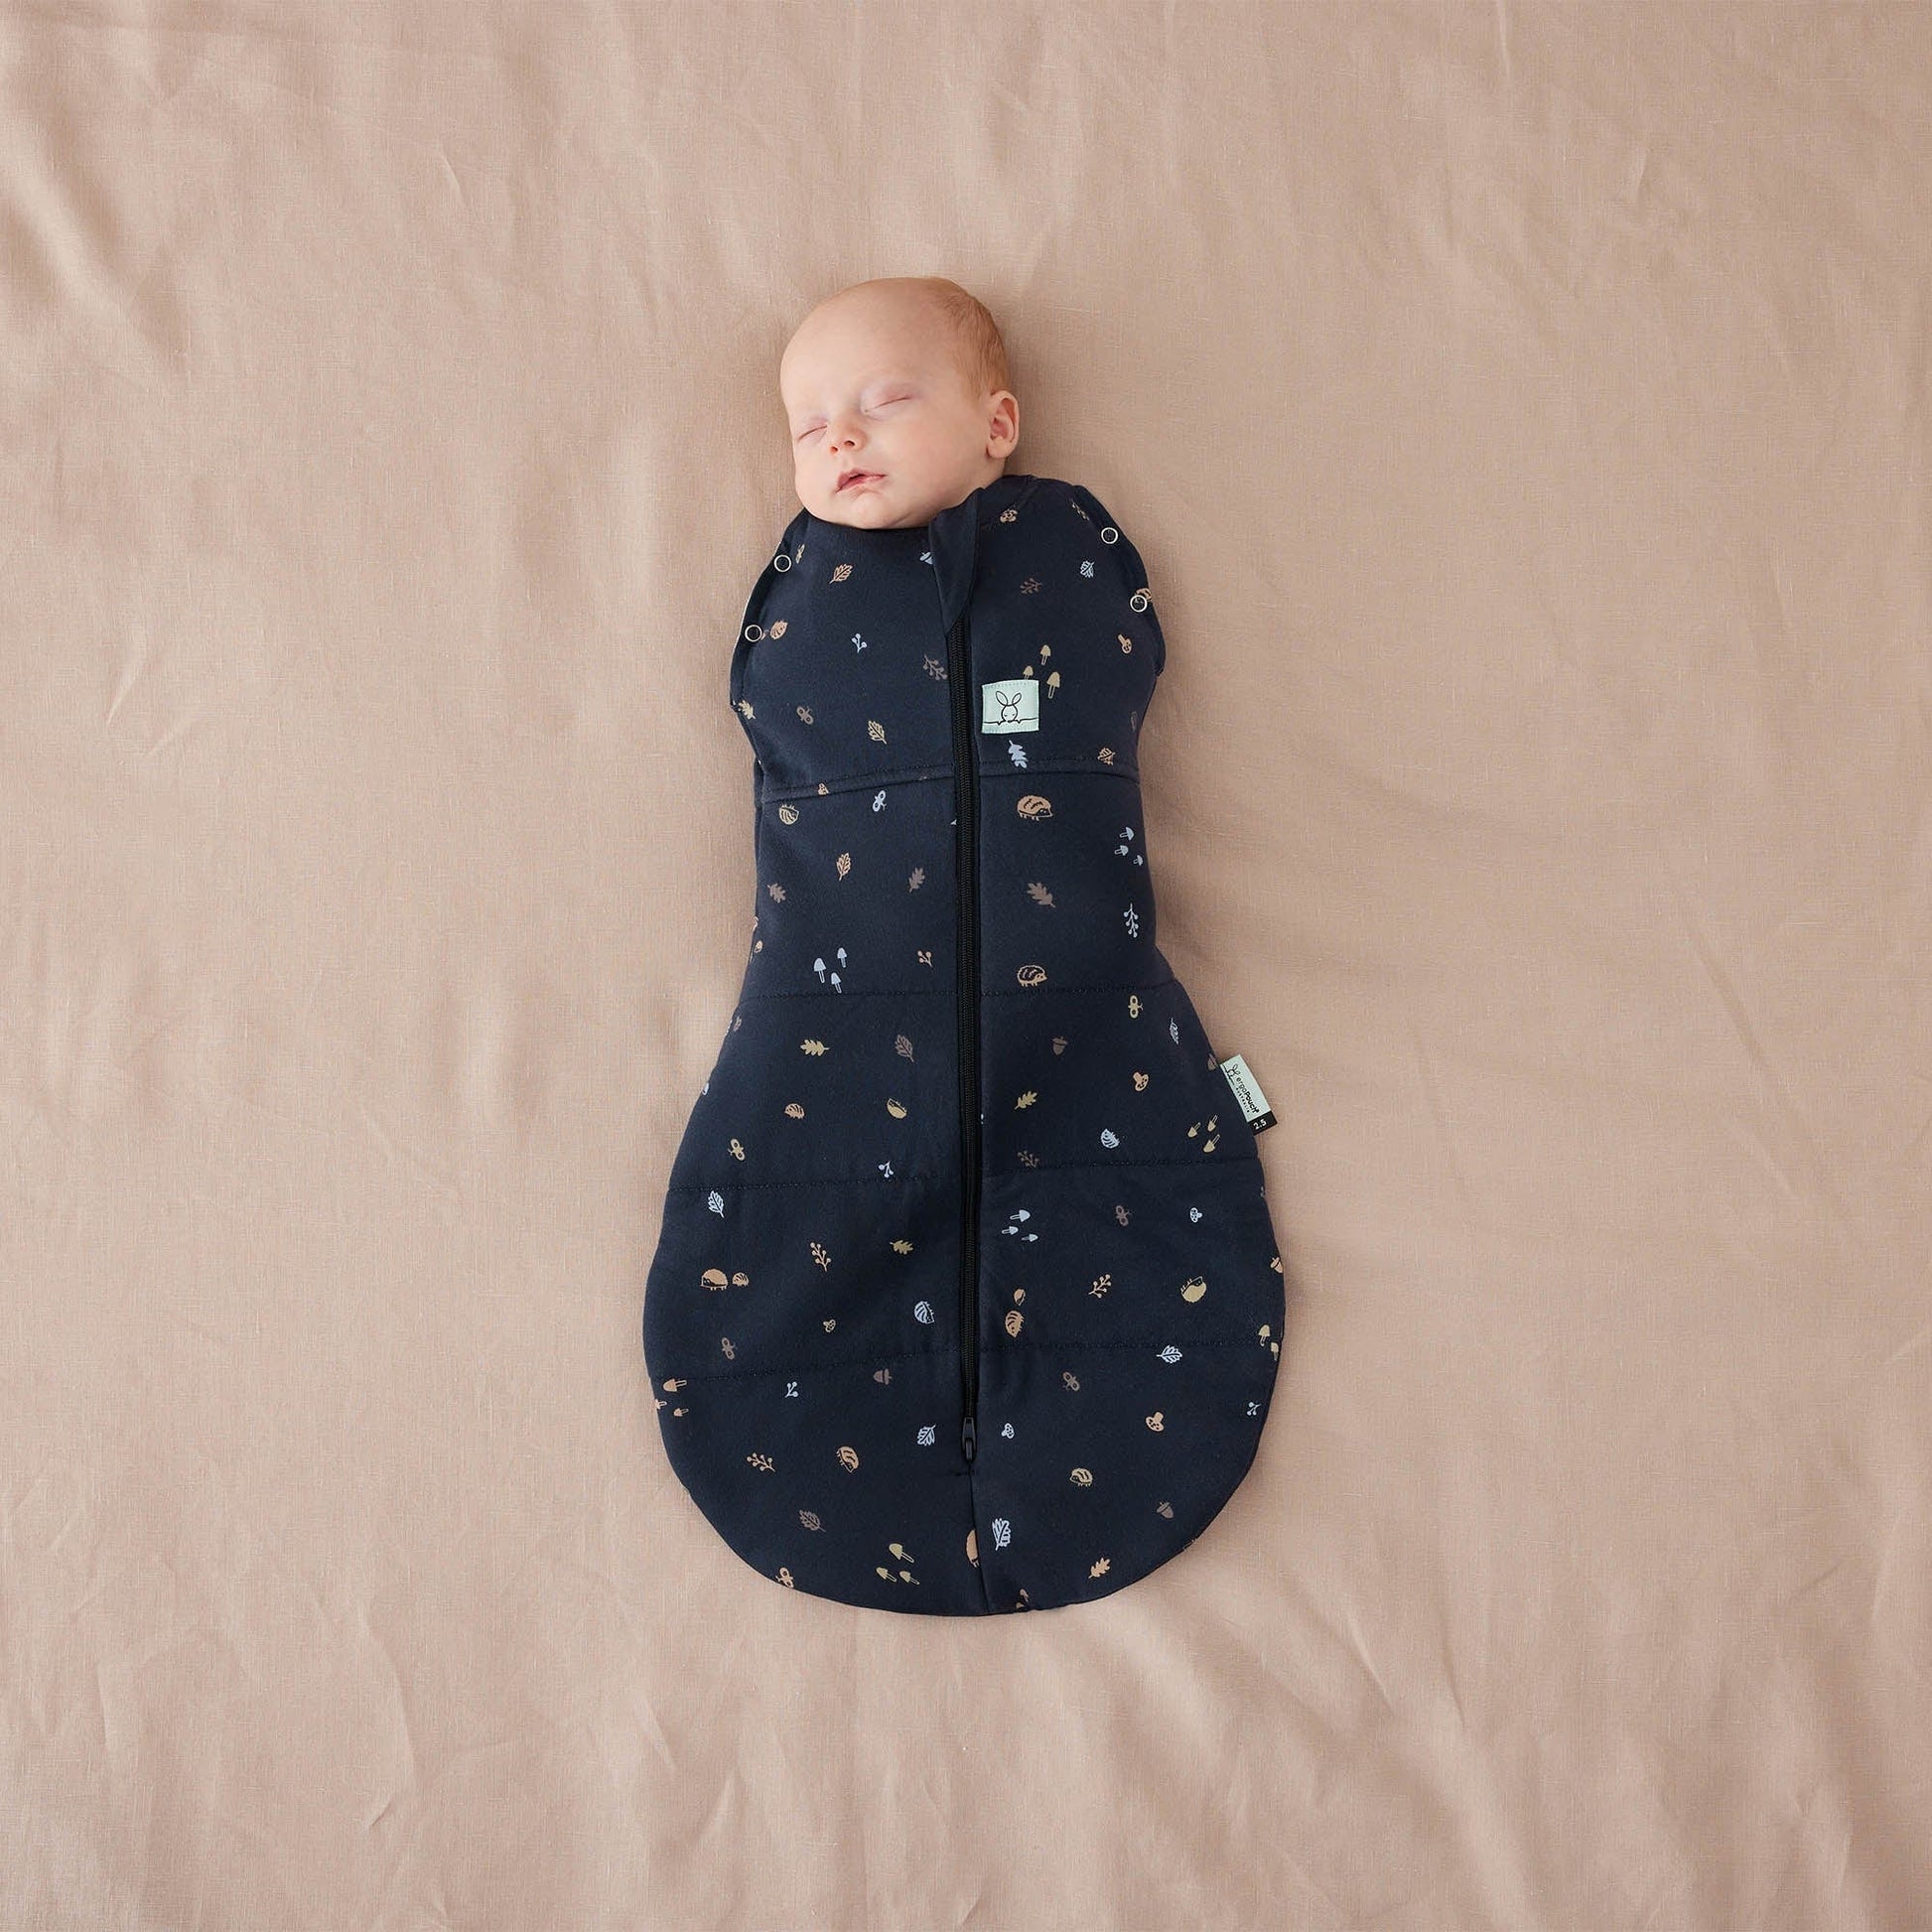 ErgoPouch - Cocoon Swaddle Bag - Hedgehog - 2.5 TOG - Stylemykid.com